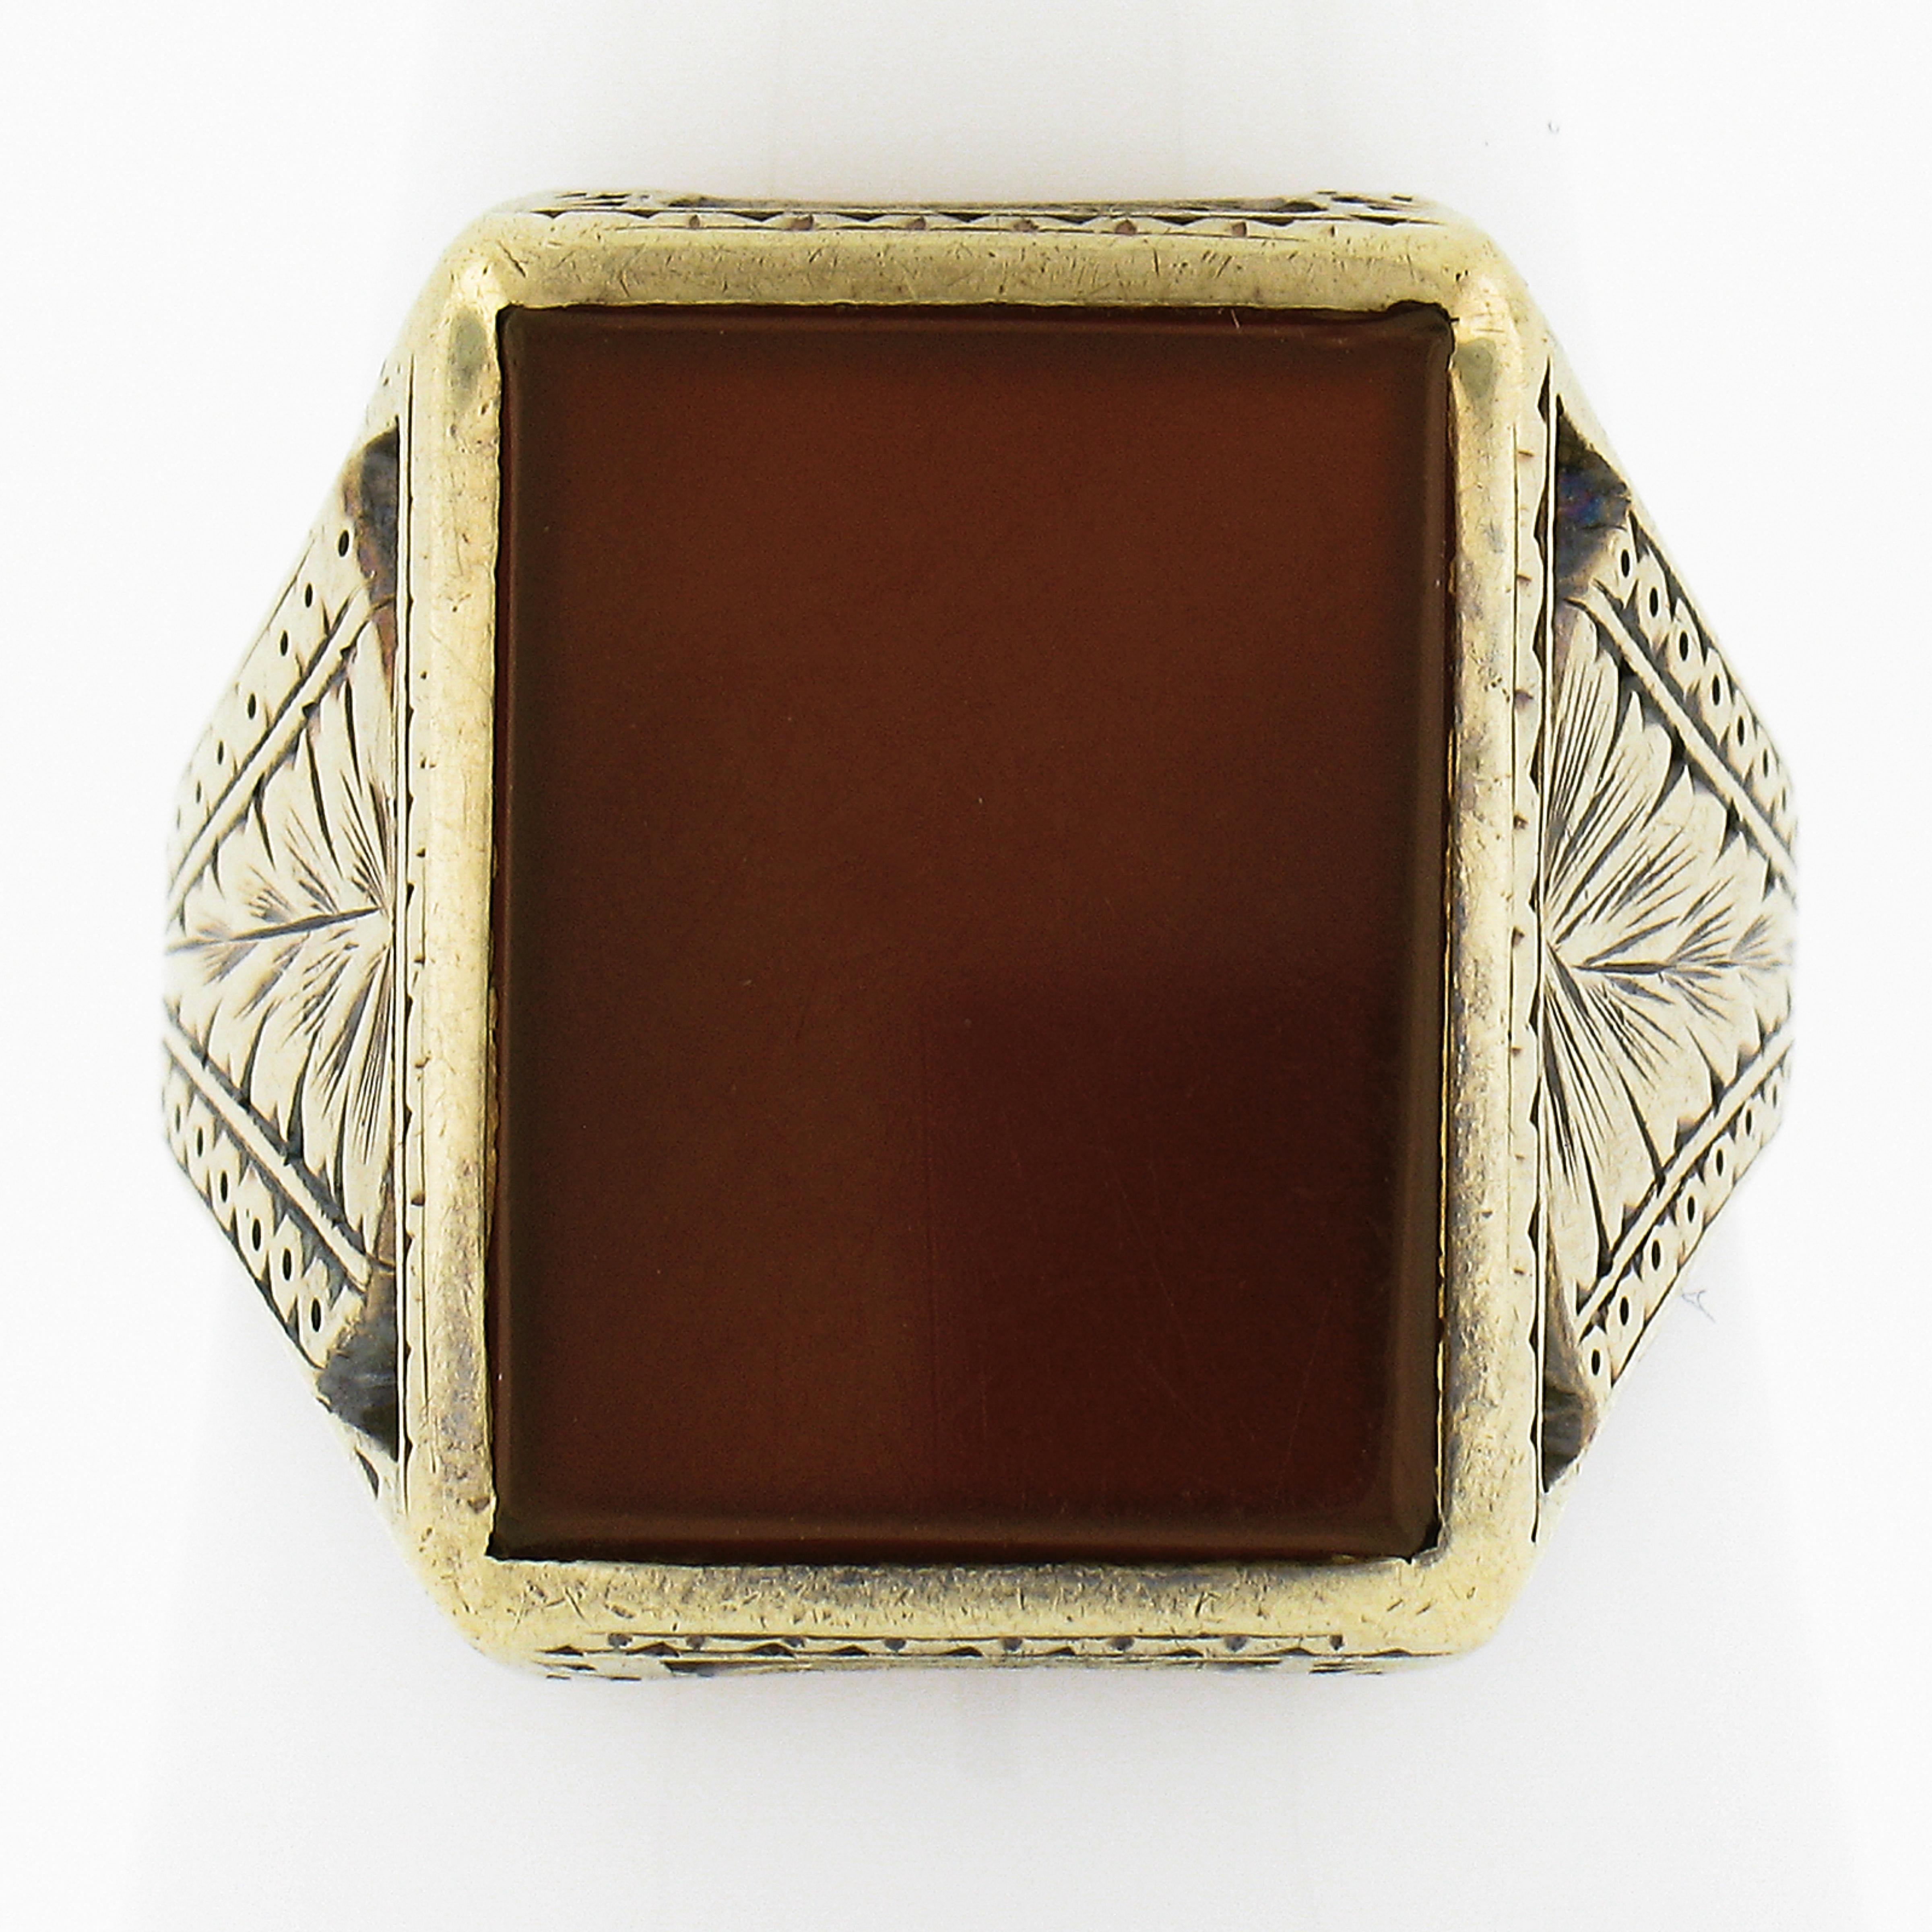 --Stone(s):--
(1) Natural Genuine Carnelian - Rectangular Cut - Bezel Set - Rich Brownish Orange Color - 15x11.3mm (approx.)

Material: 14K Solid Yellow Gold
Weight: 7.13 Grams
Ring Size: 10.0 (Fitted on a finger. We can custom size this ring -